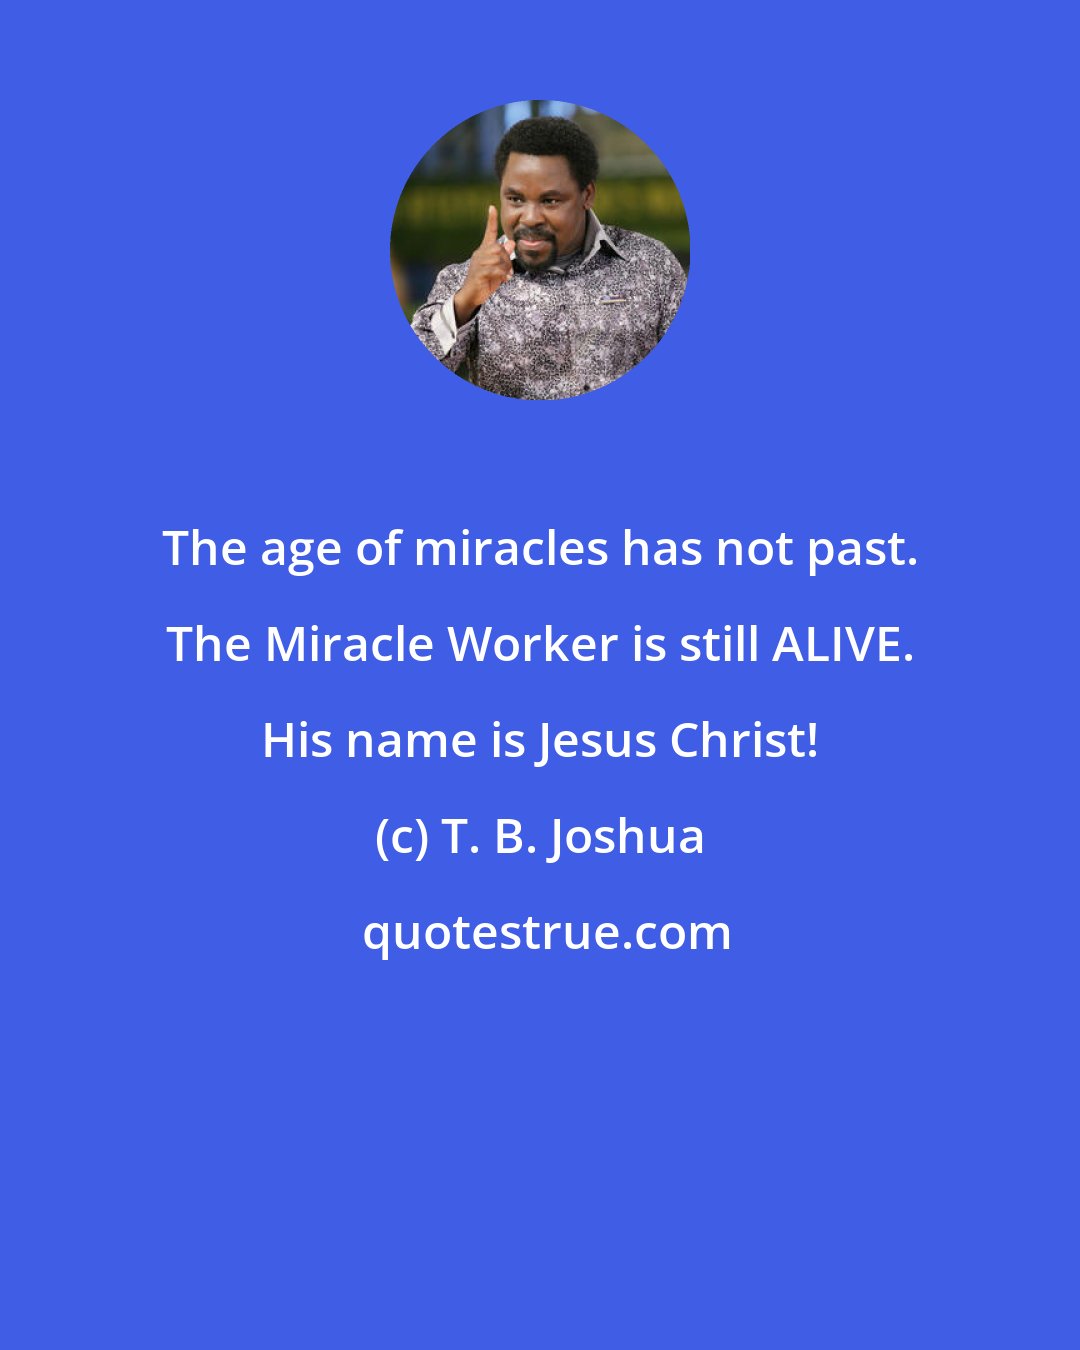 T. B. Joshua: The age of miracles has not past. The Miracle Worker is still ALIVE. His name is Jesus Christ!